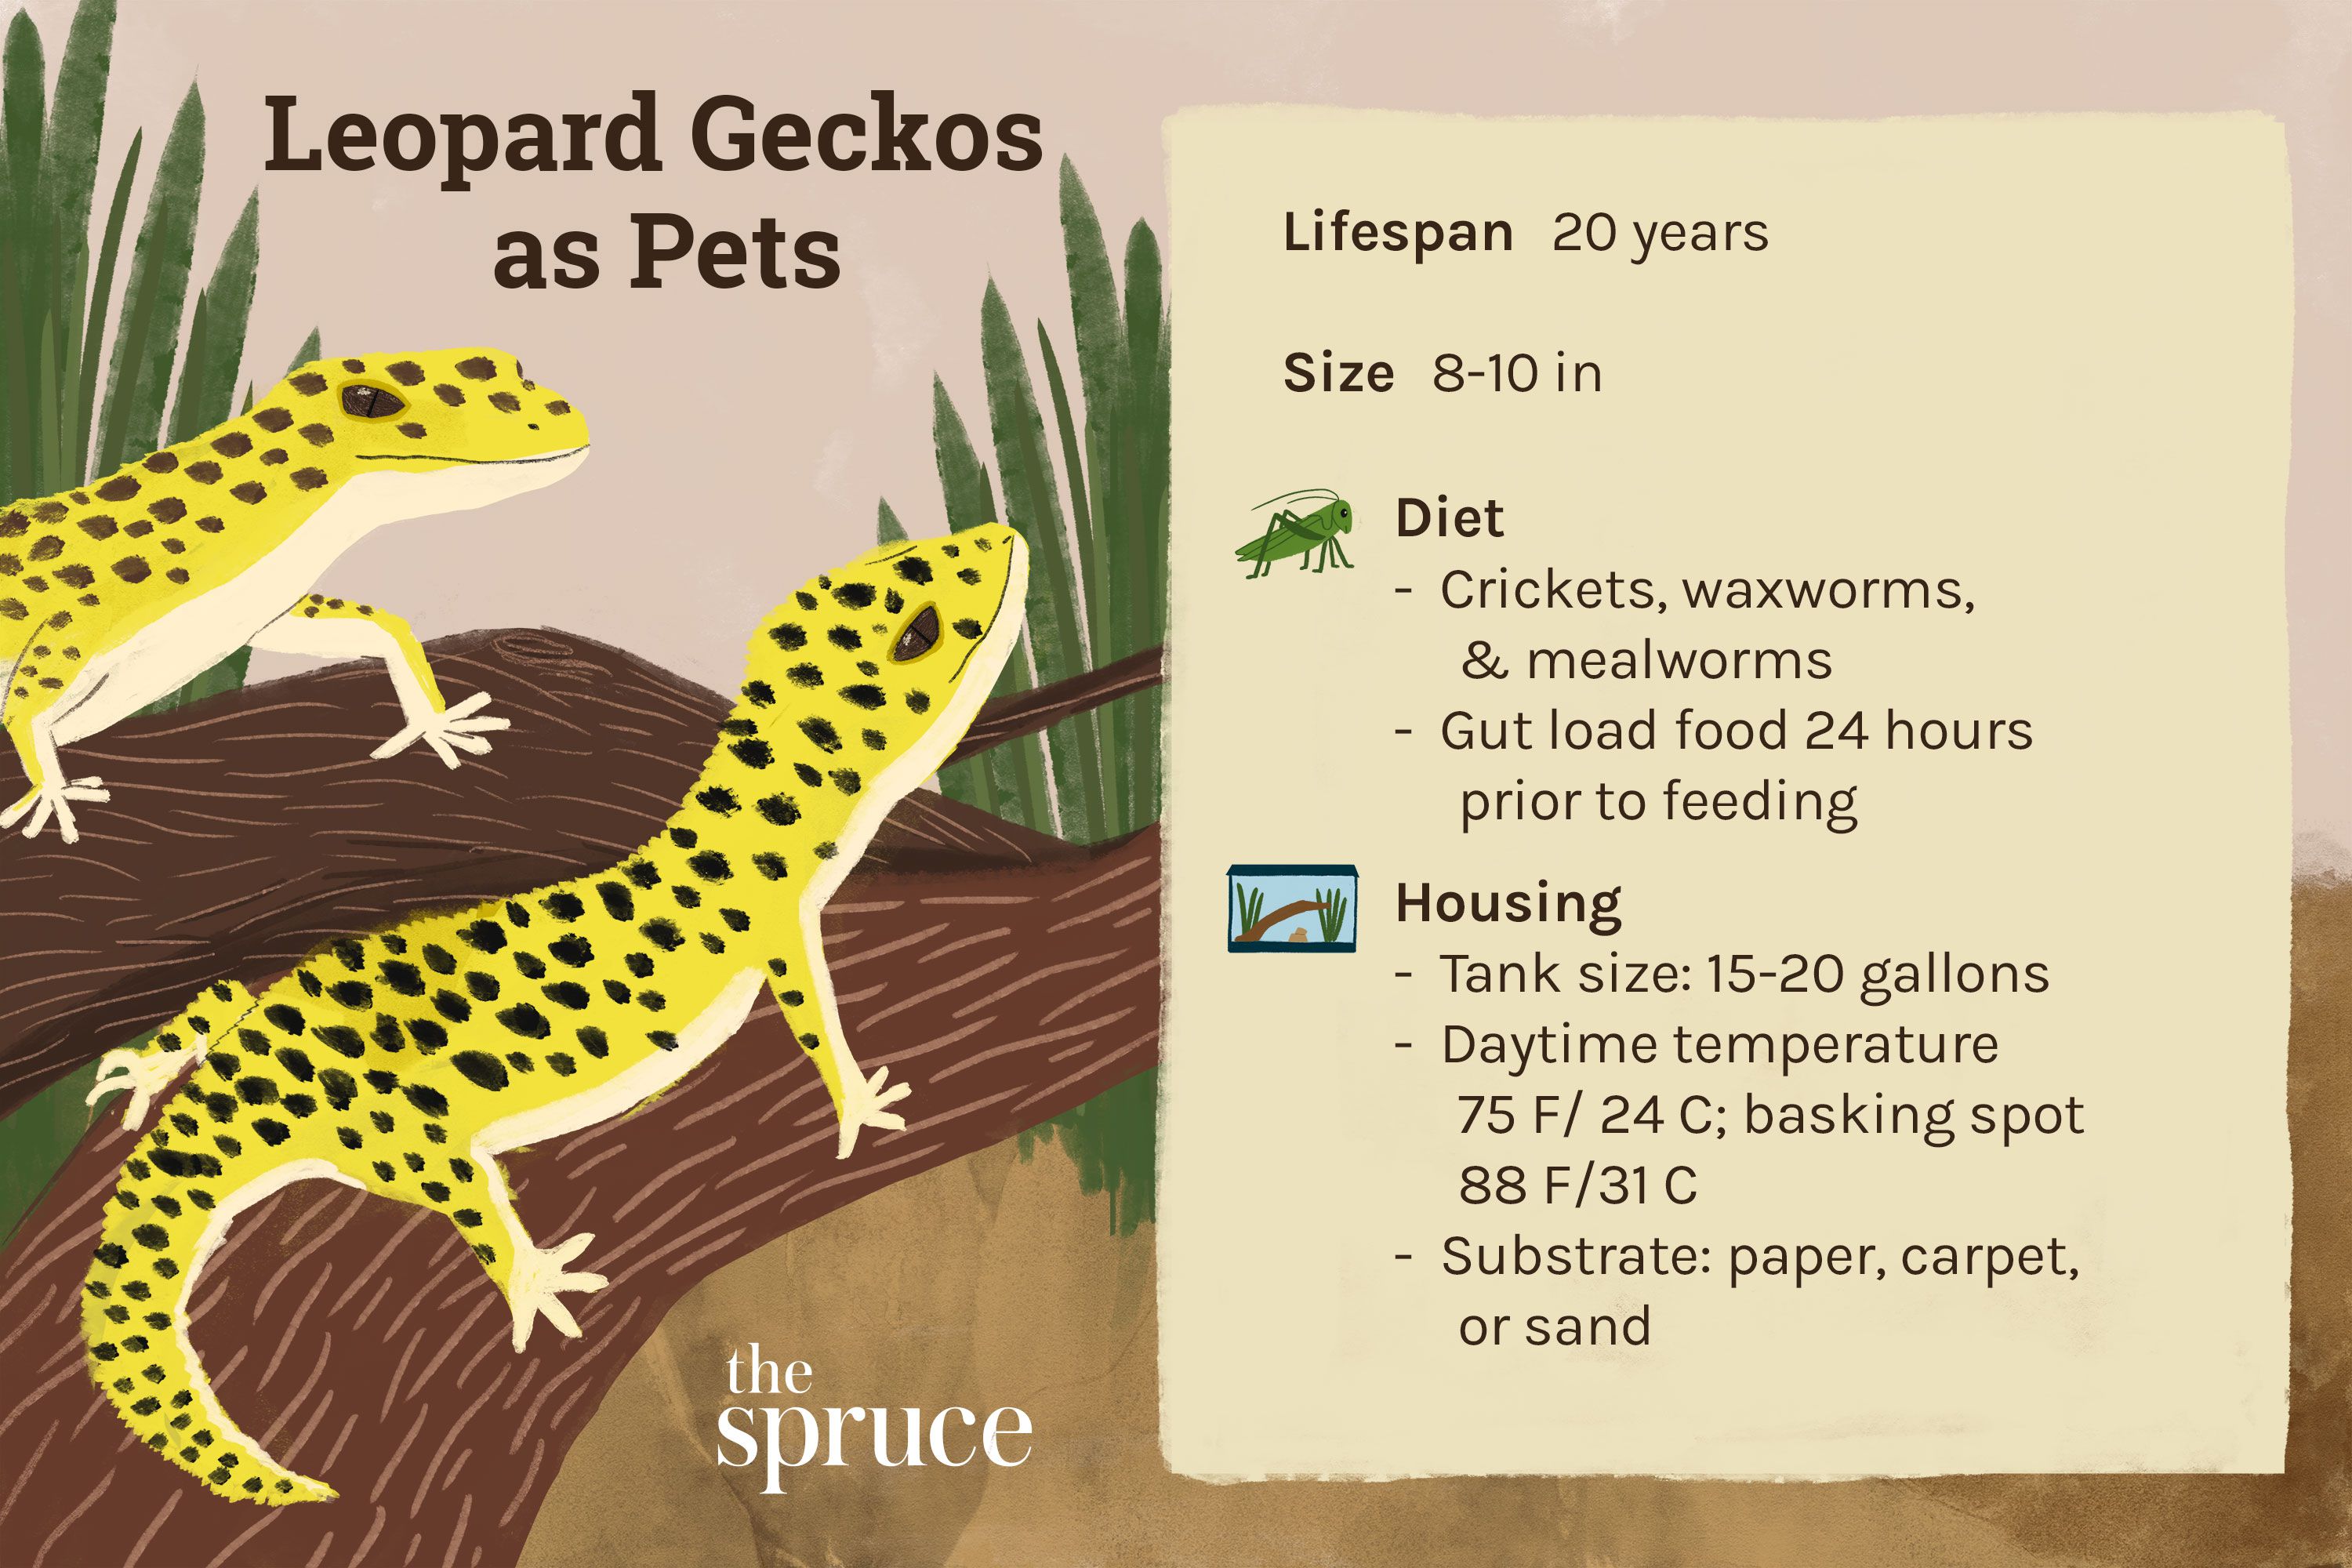 Are Leopard Geckos Hard to Take Care of?